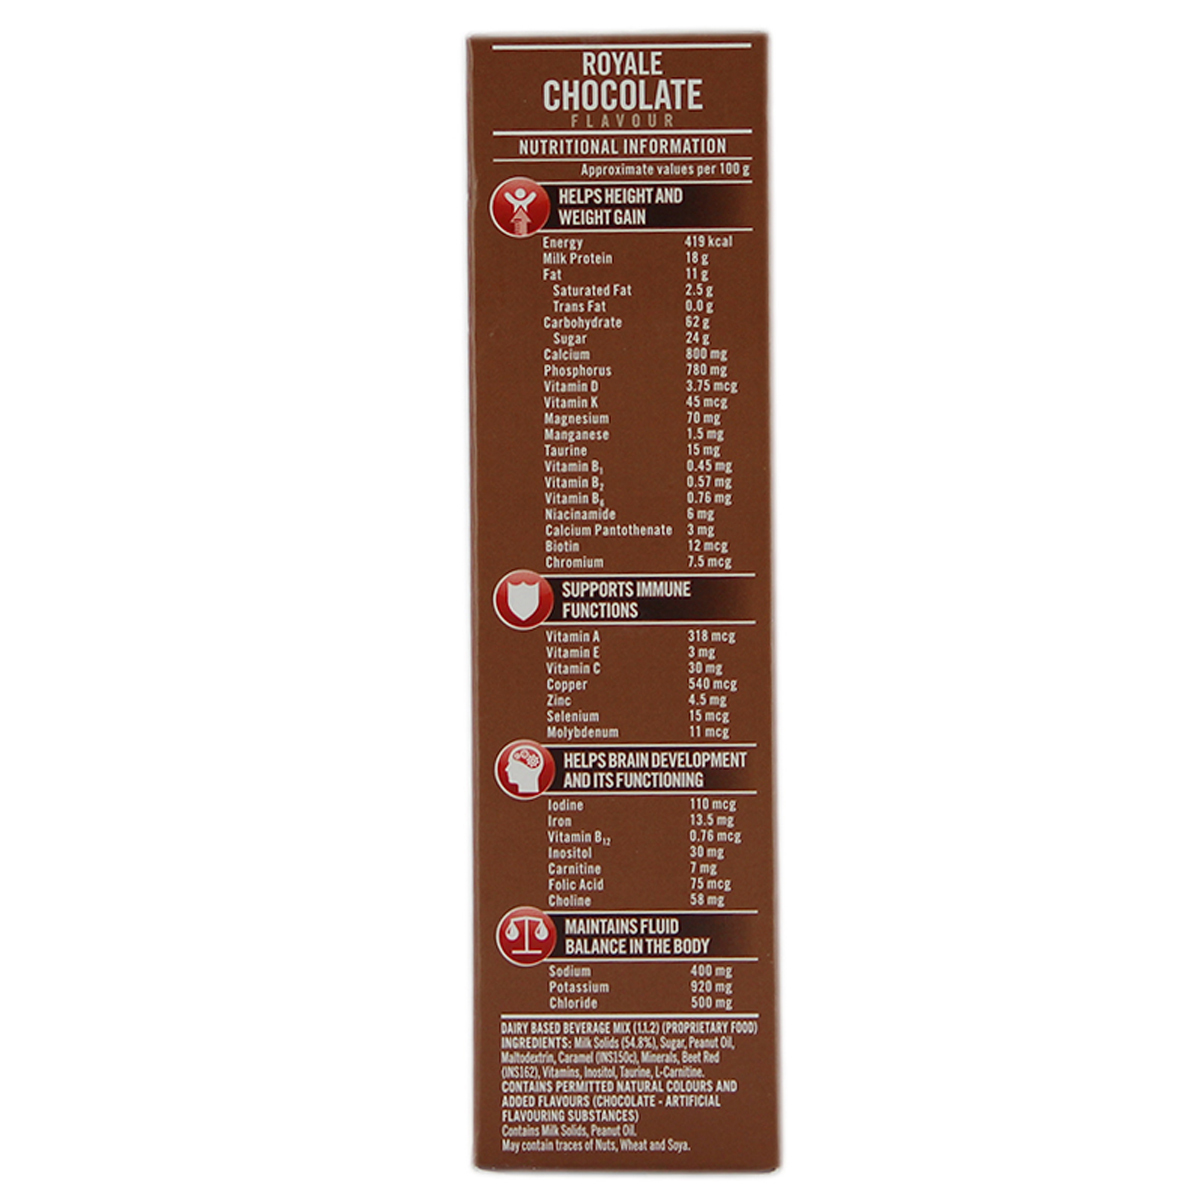 Complan Milk Drink Classic Chocolate Flavour 200g